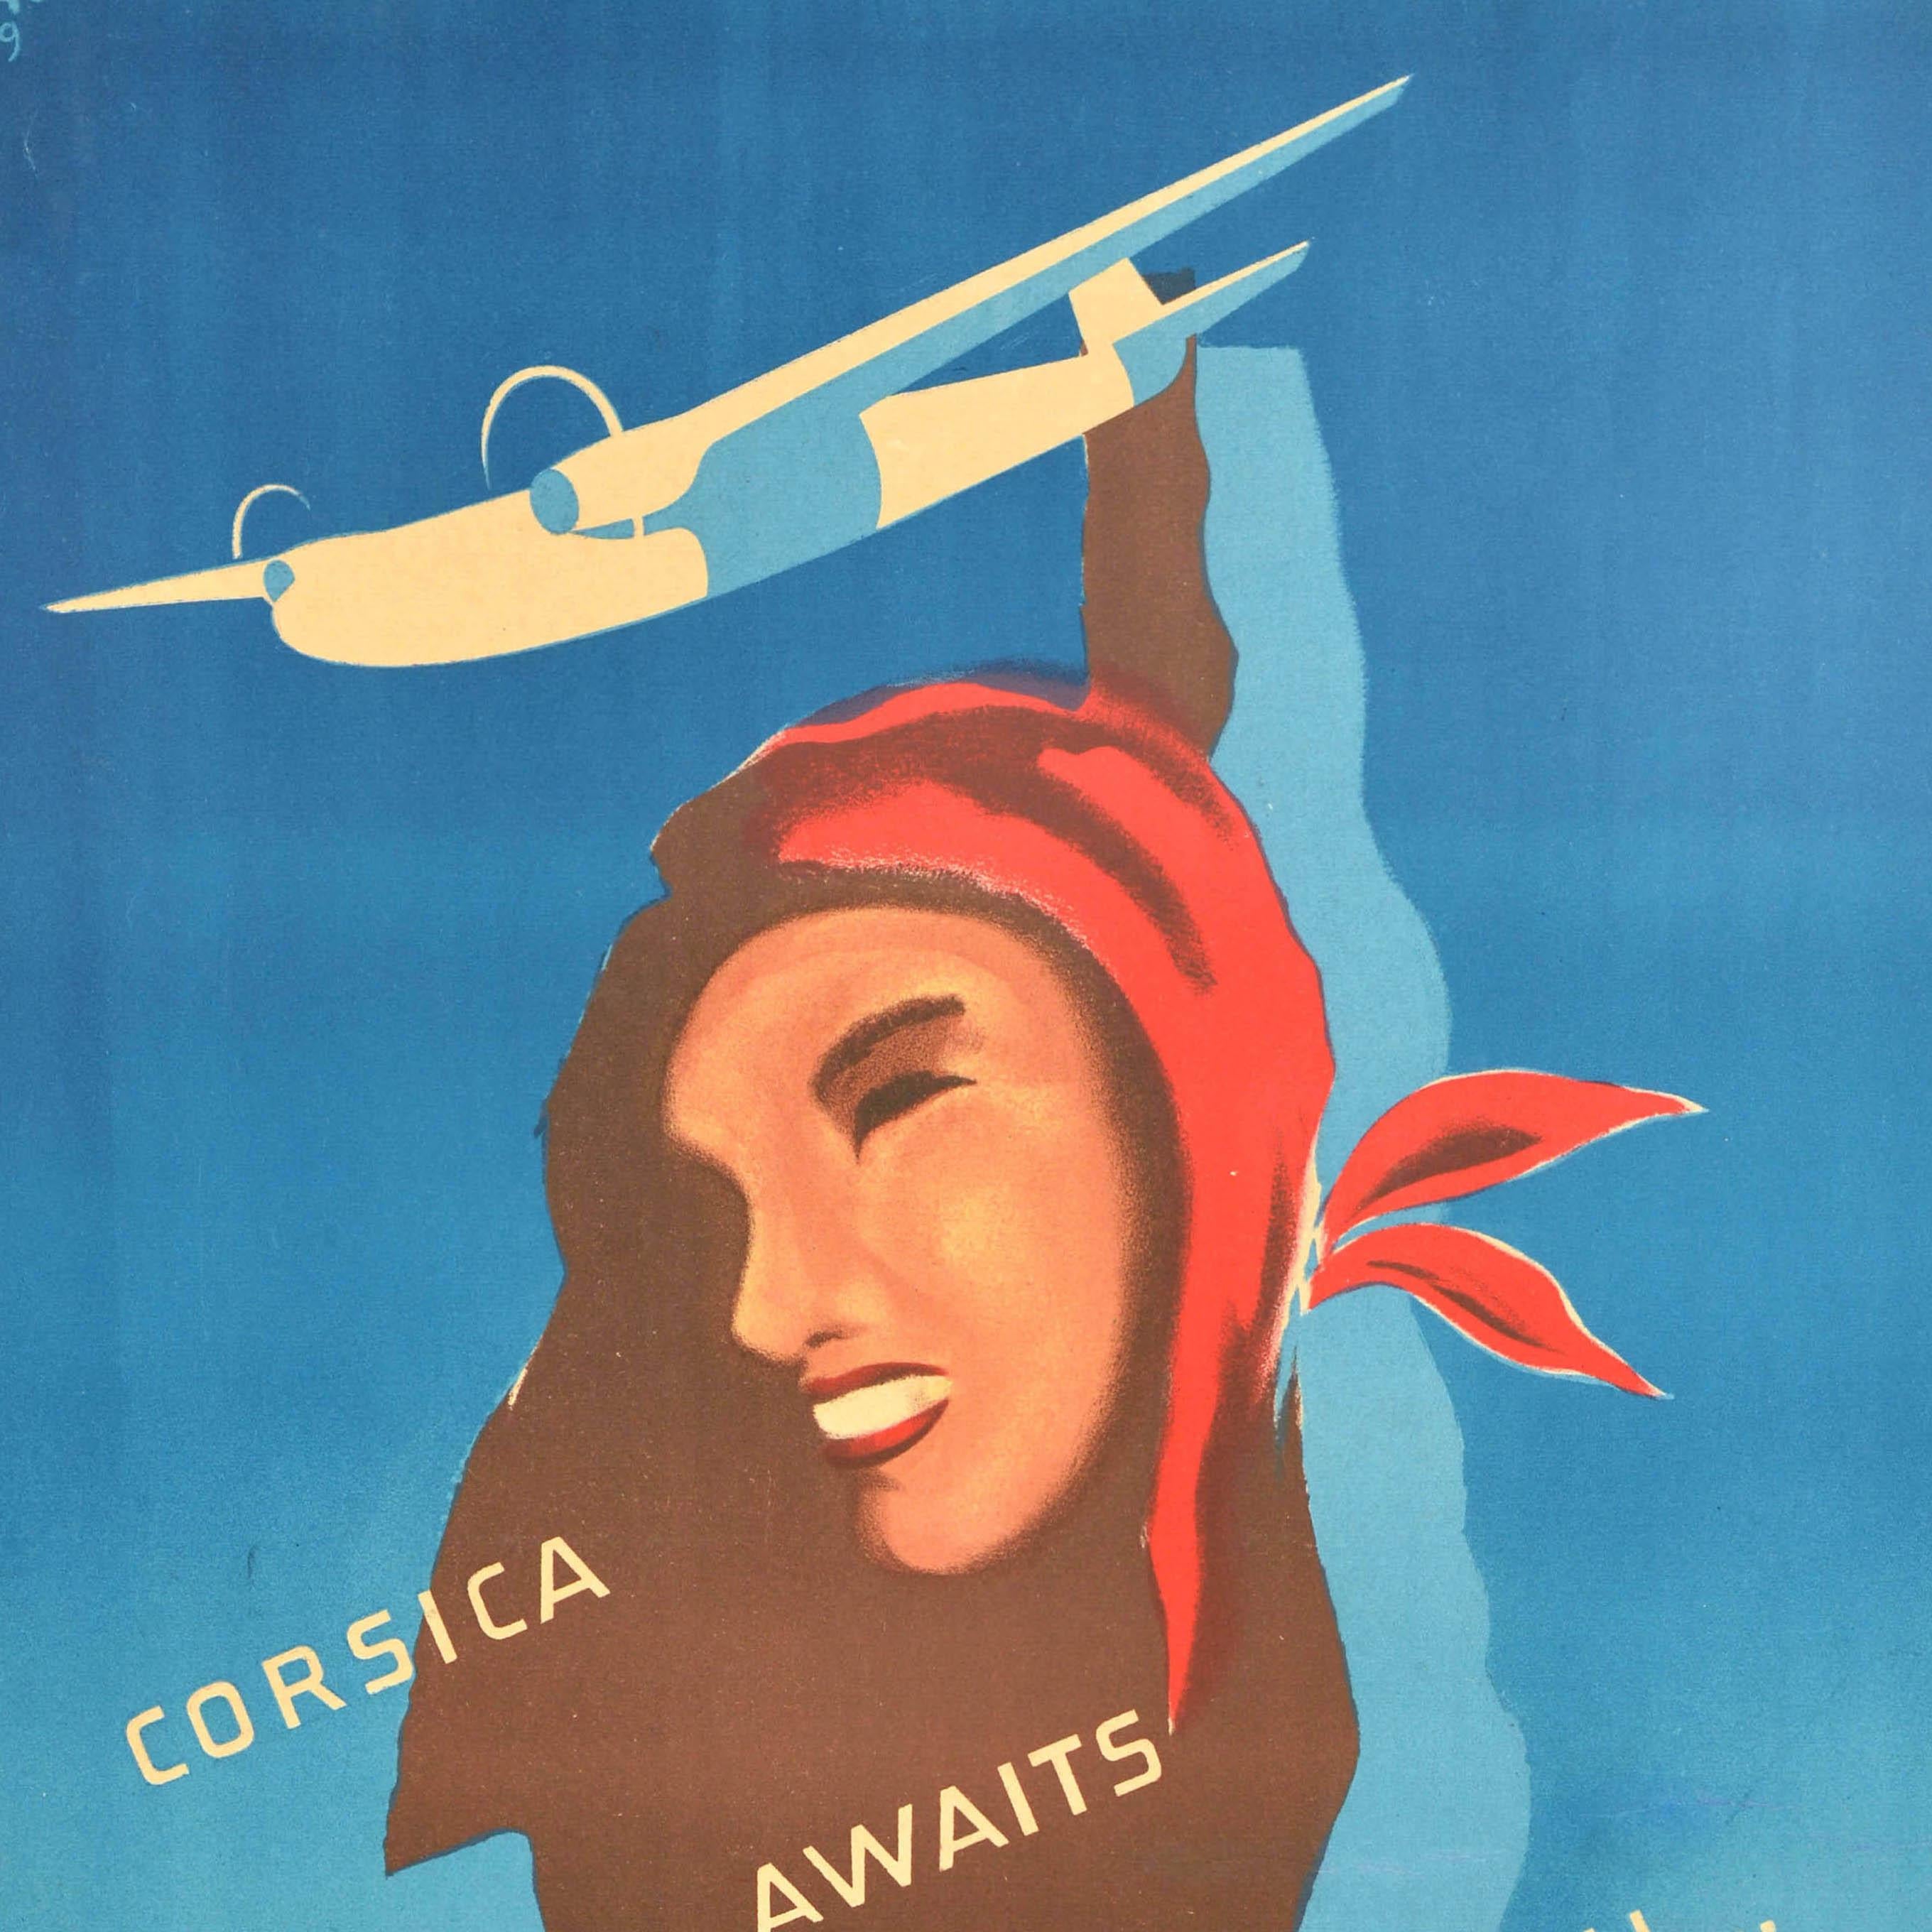 Original Vintage Travel Advertising Poster Airspan Travel Corsica Awaits You - Print by Unknown